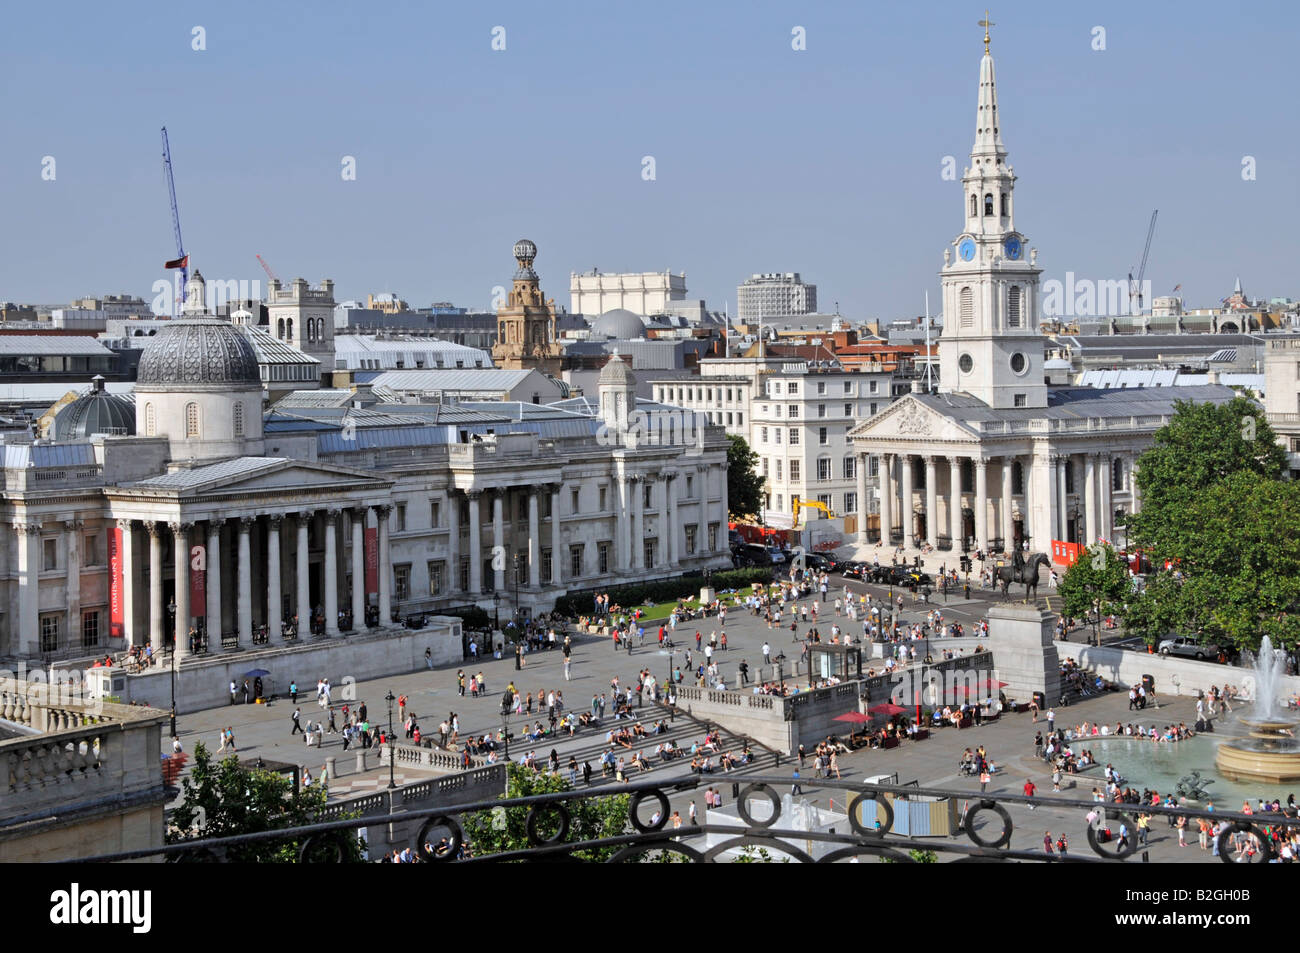 Aerial view looking down on sightseeing tourists in historical Trafalgar Square spire of St Martin in the Fields church & National Gallery London UK Stock Photo